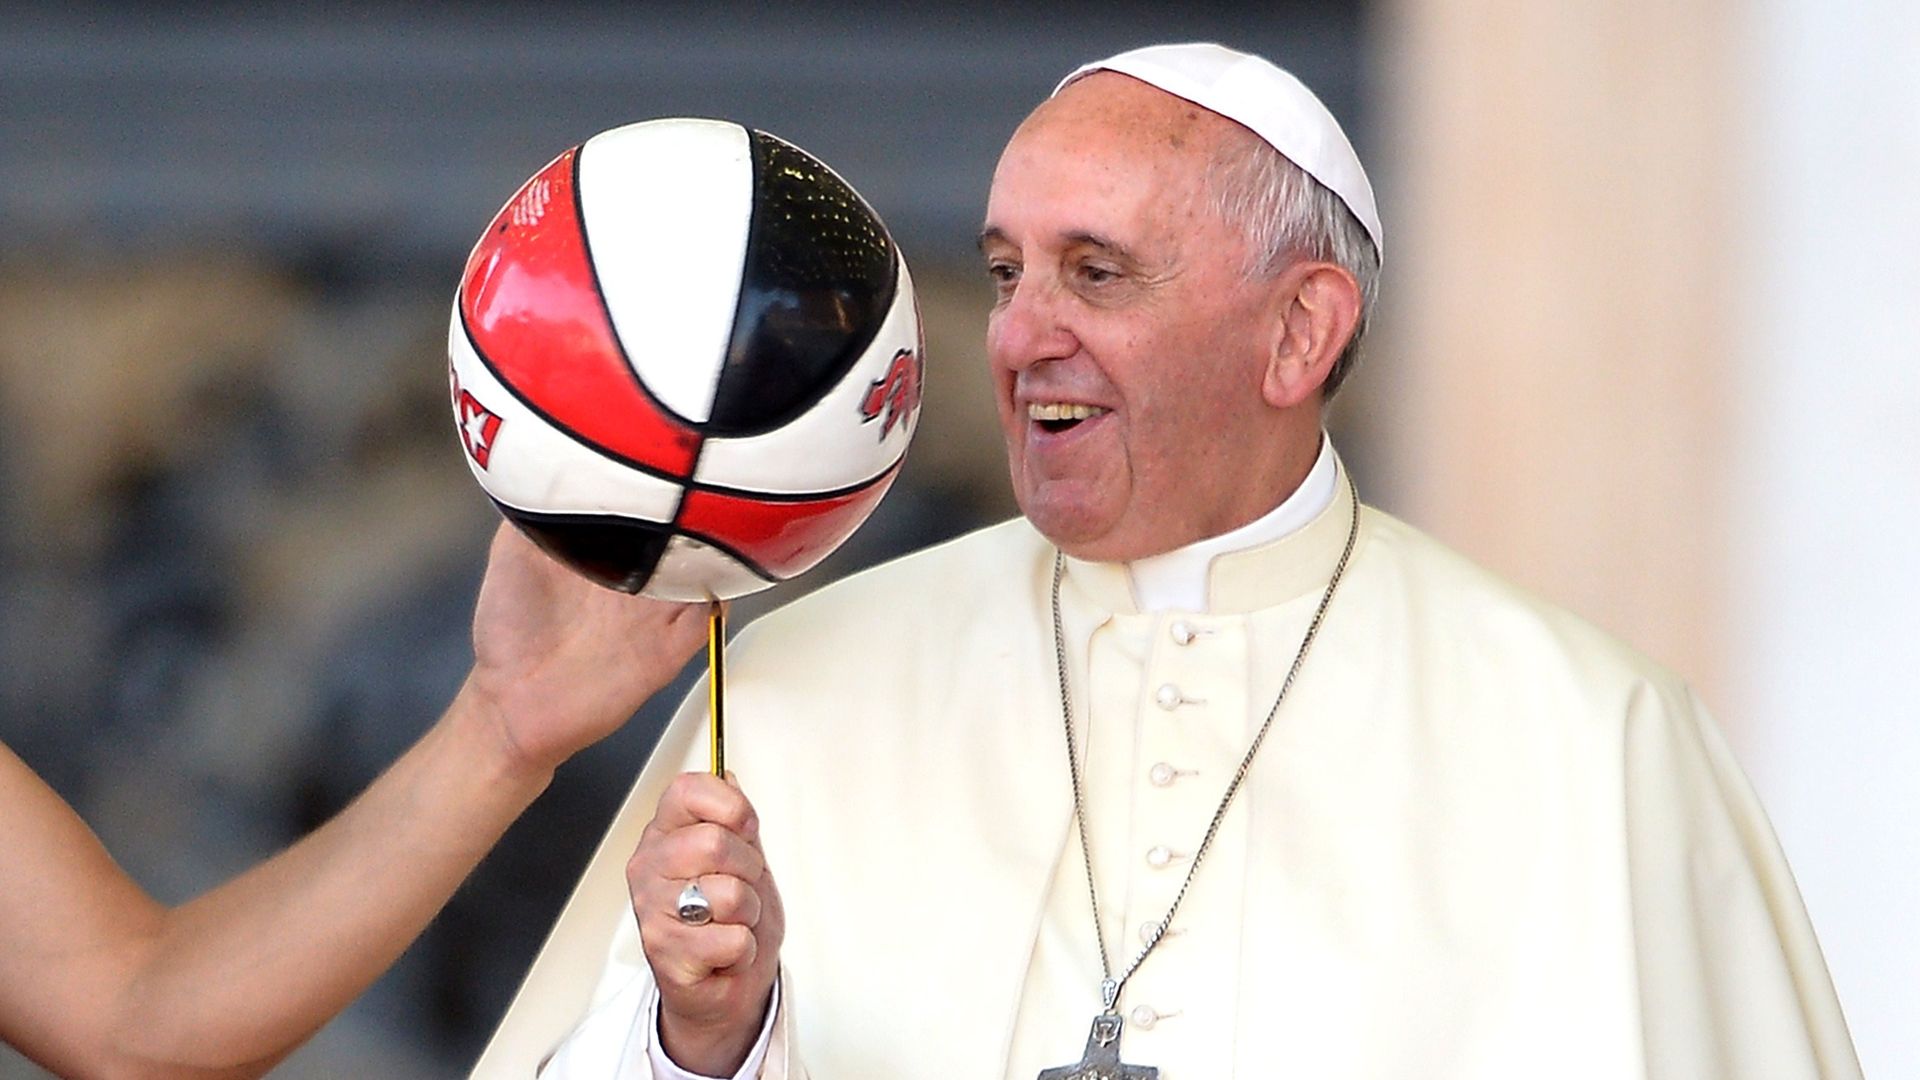 The Pope with a basketball